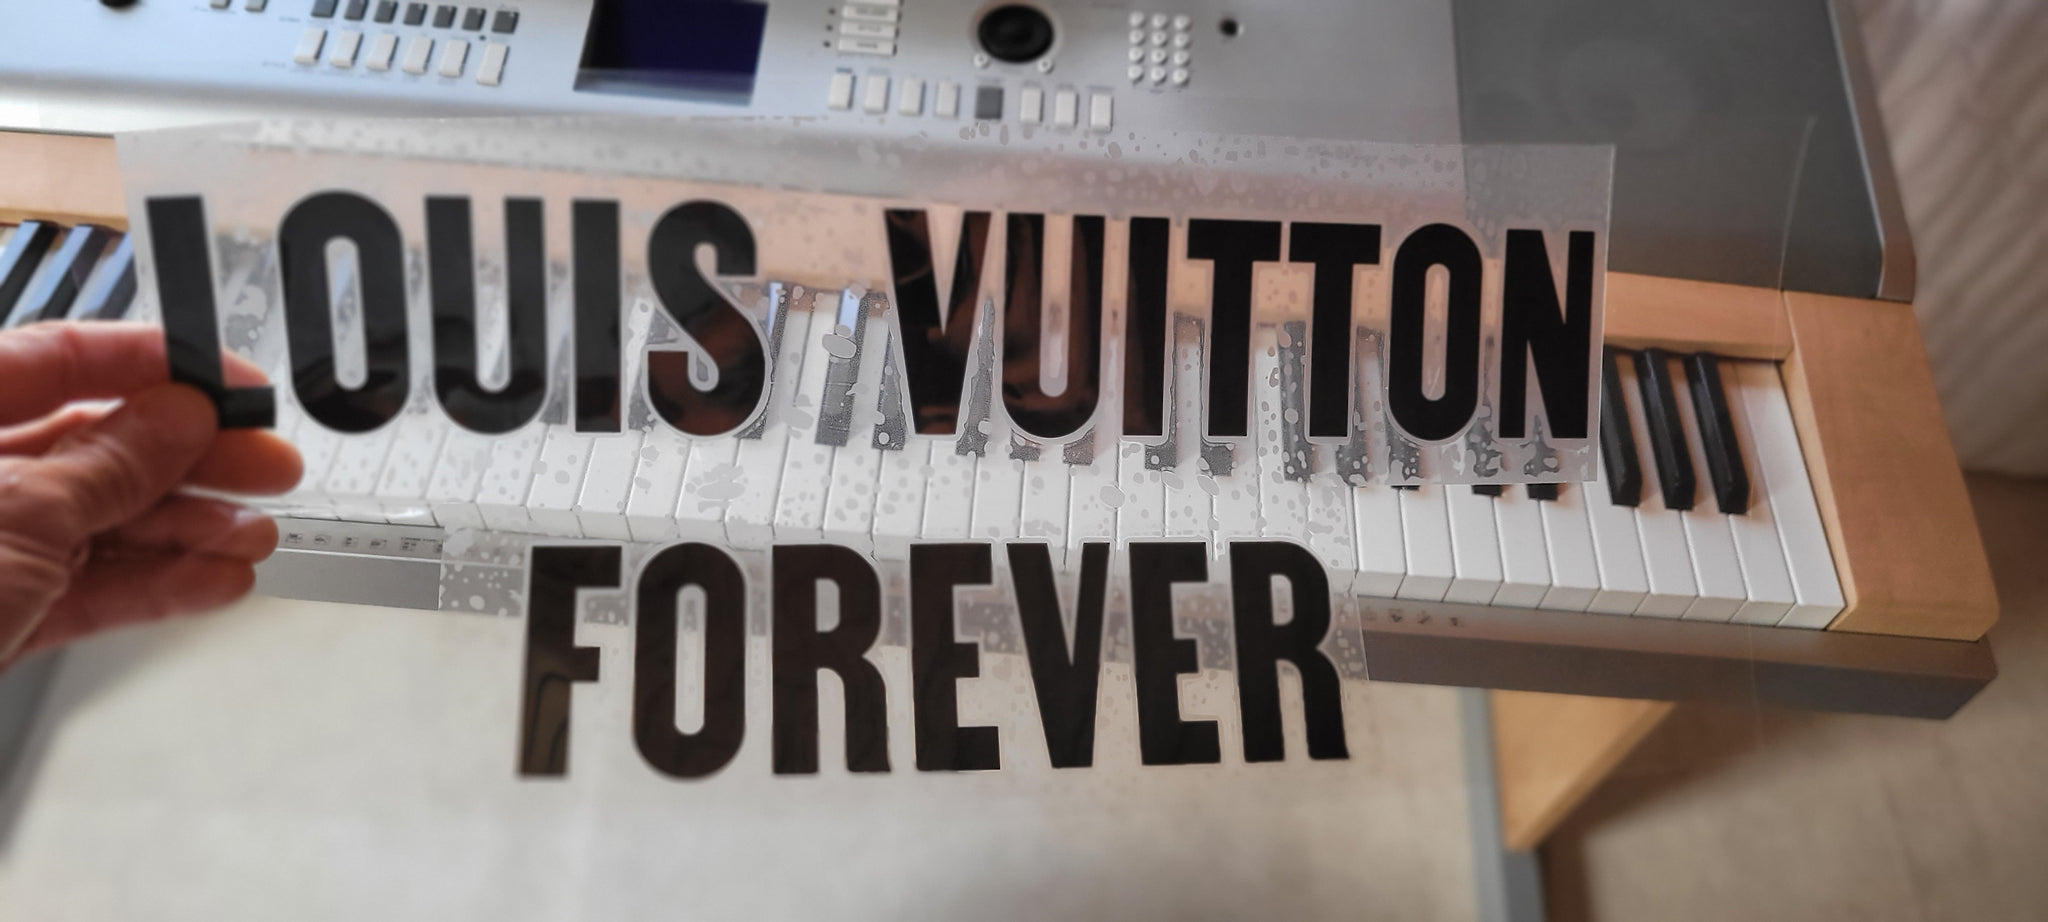 LV Louis Vuitton Forever Logo Iron-on Decal (heat transfer) – Customeazy